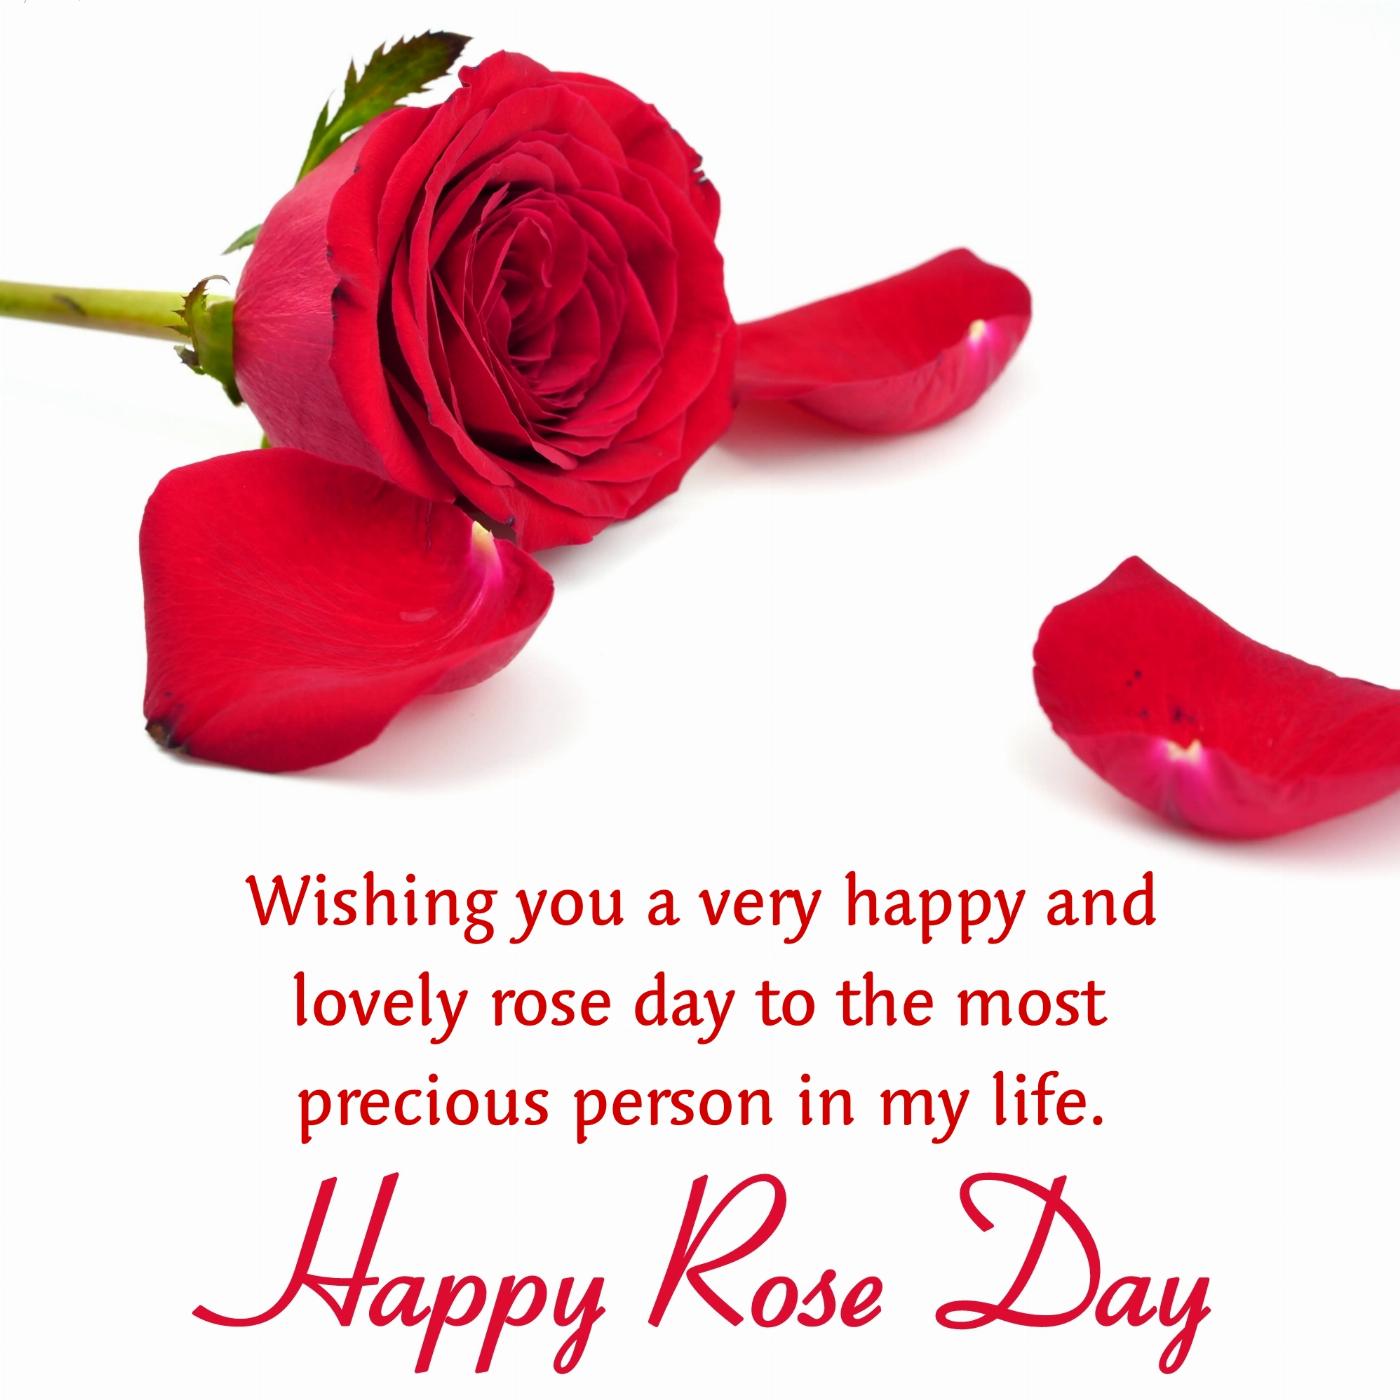 Wishing you a very happy and lovely rose day